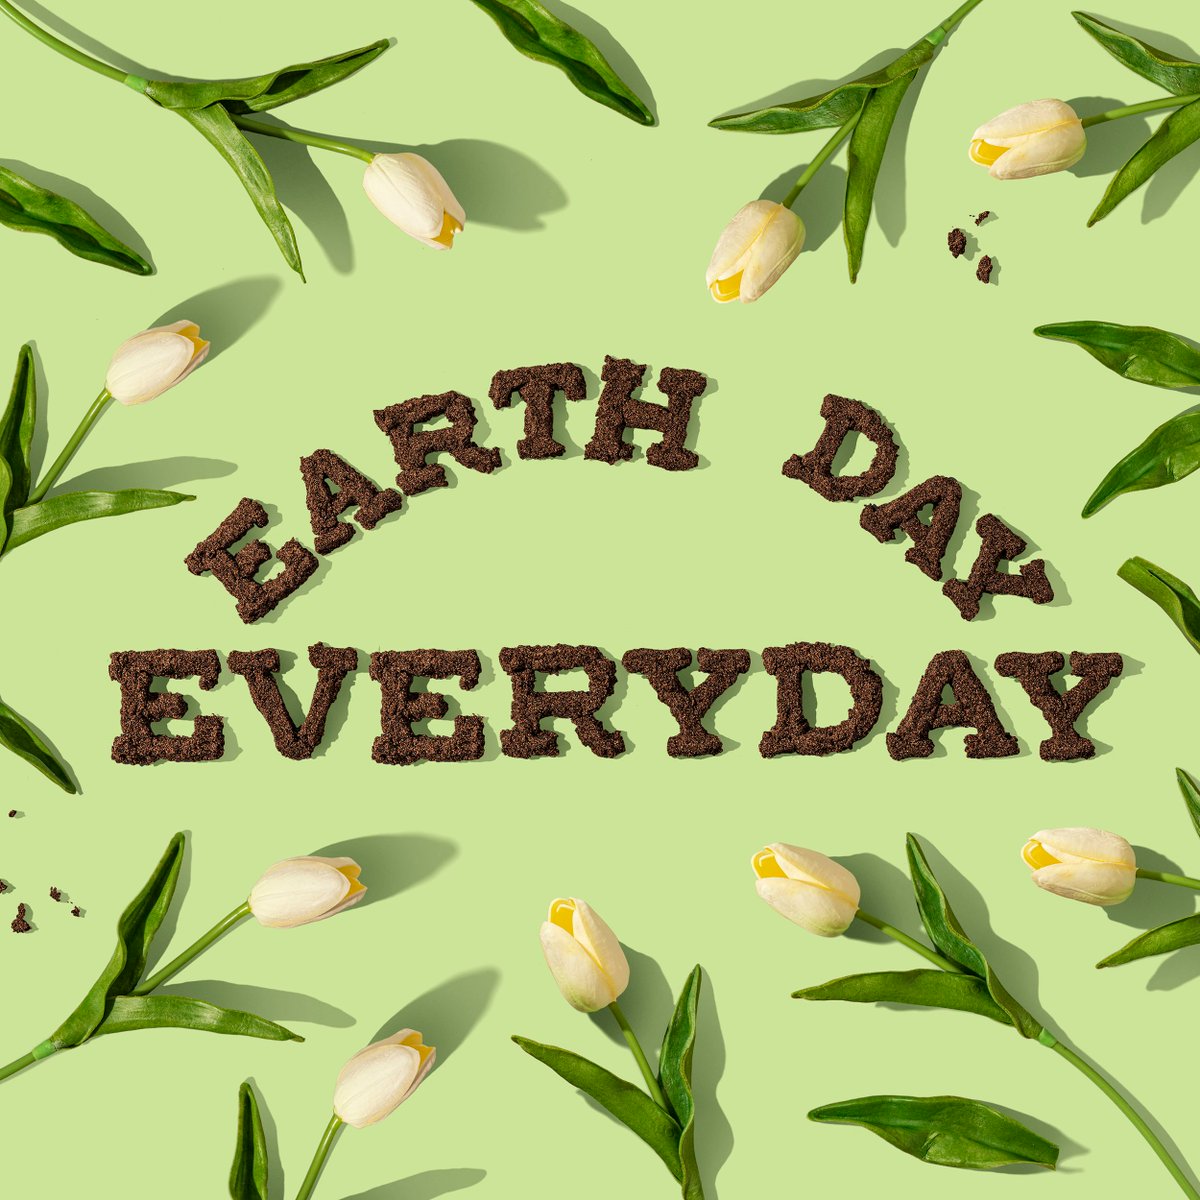 ME&A wishes everyone a happy #EarthDay! Let's embrace this day as a reminder of the preciousness of life and the importance of caring for our planet and all its inhabitants today and every day for generations to come.

#globaldev #intldeve #humanitarian #EarthDayEveryDay